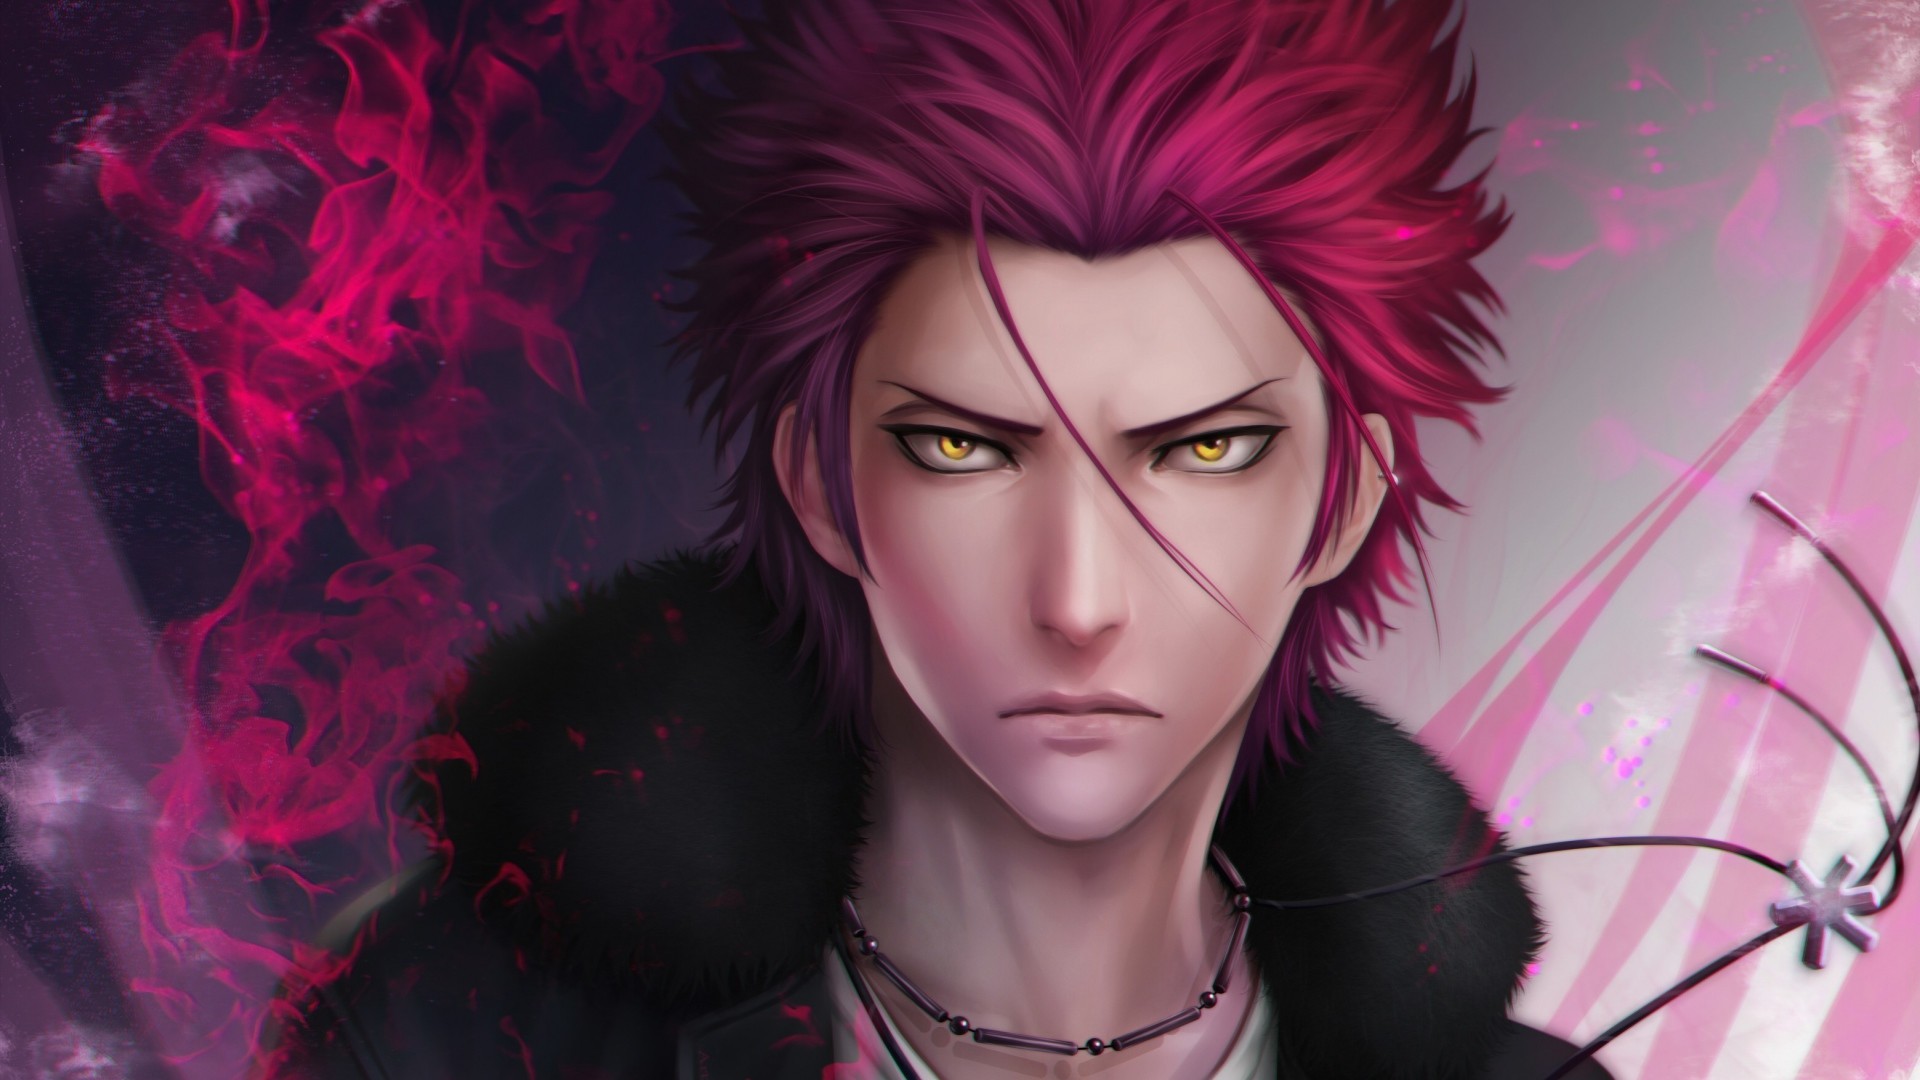 Wallpaper suoh mikoto, project k, anime, guy